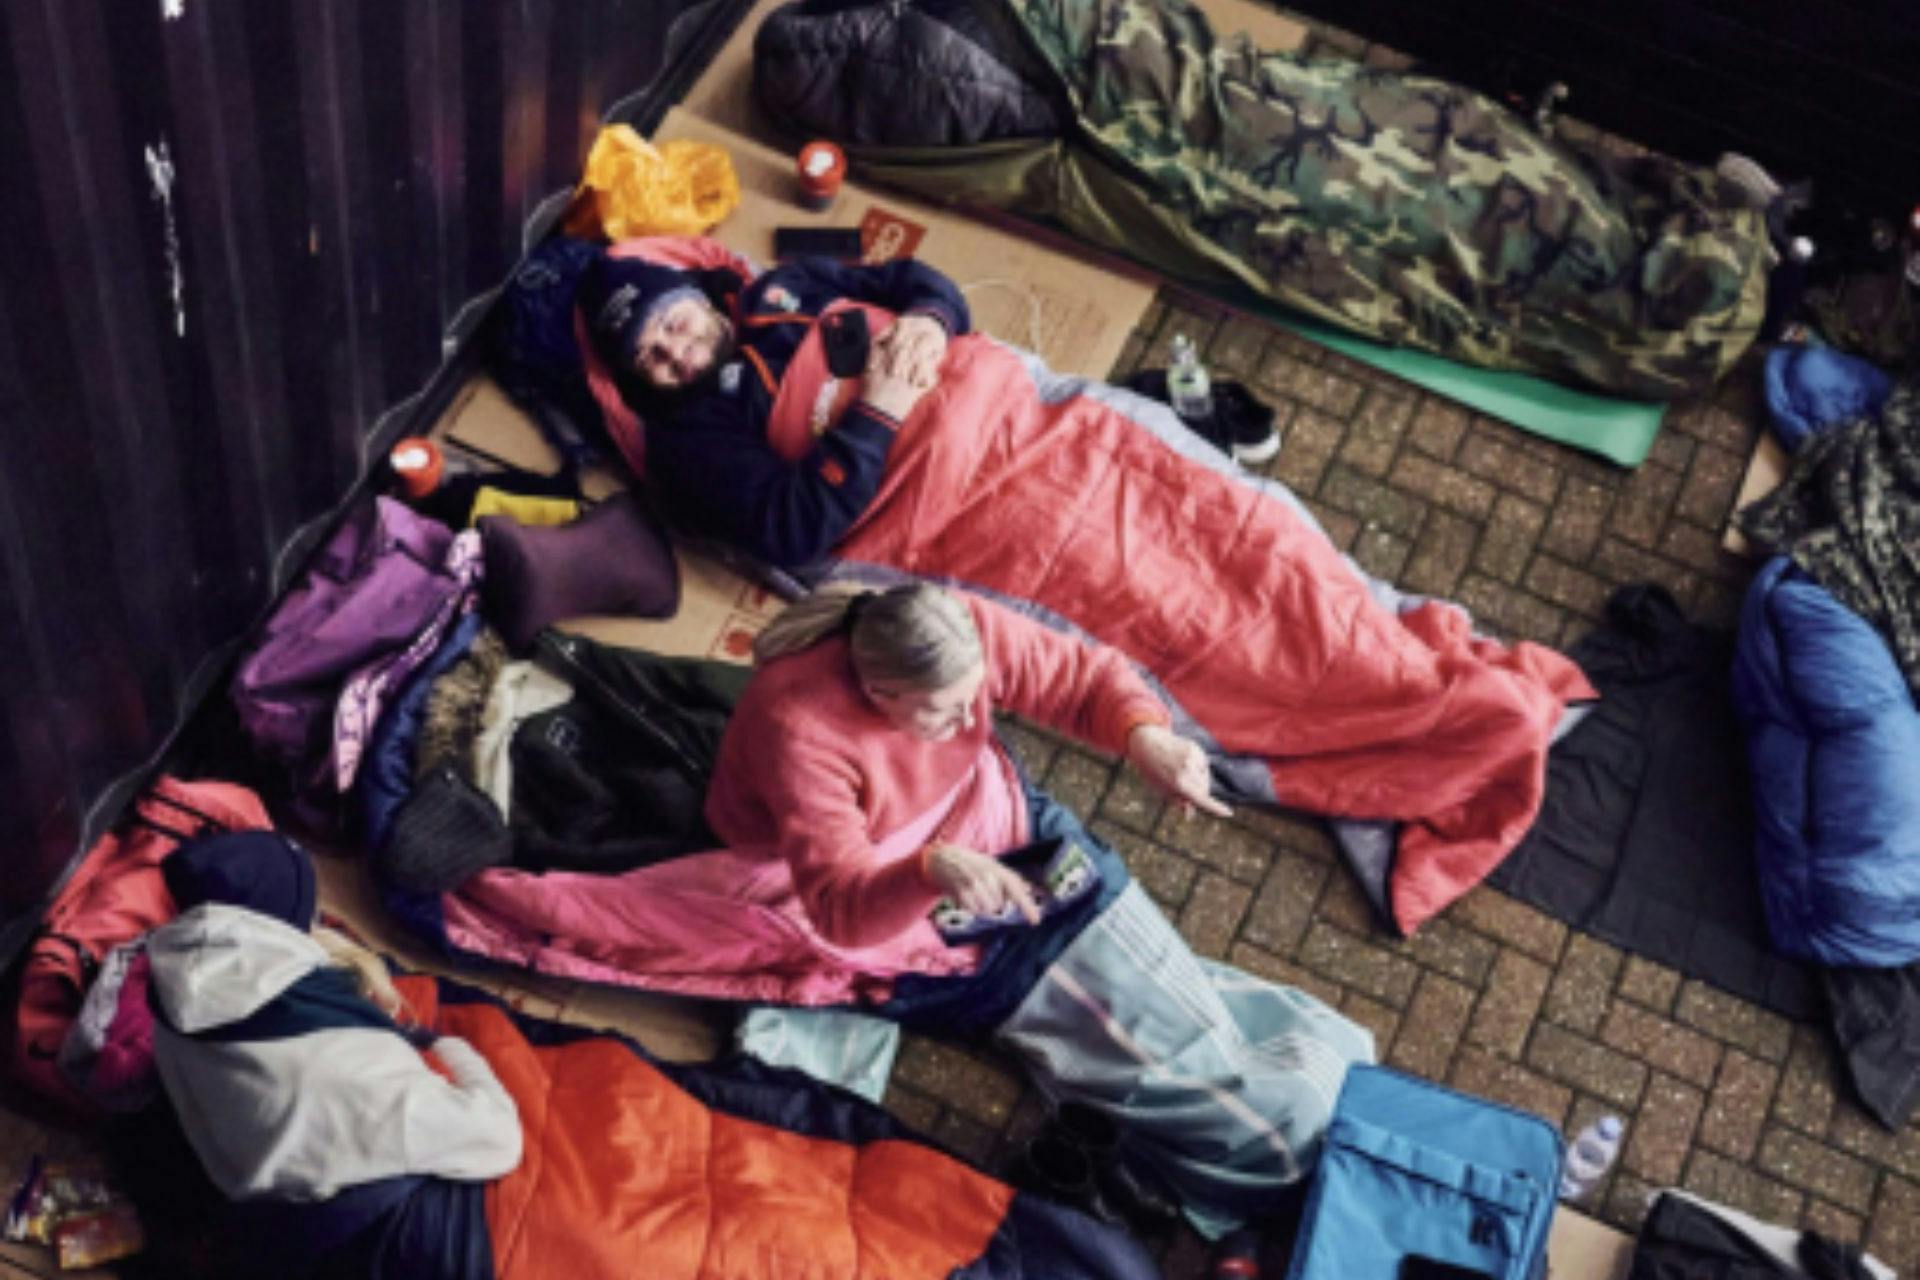 This image depicts a group of people lying on sleeping bags and mats on a brick floor